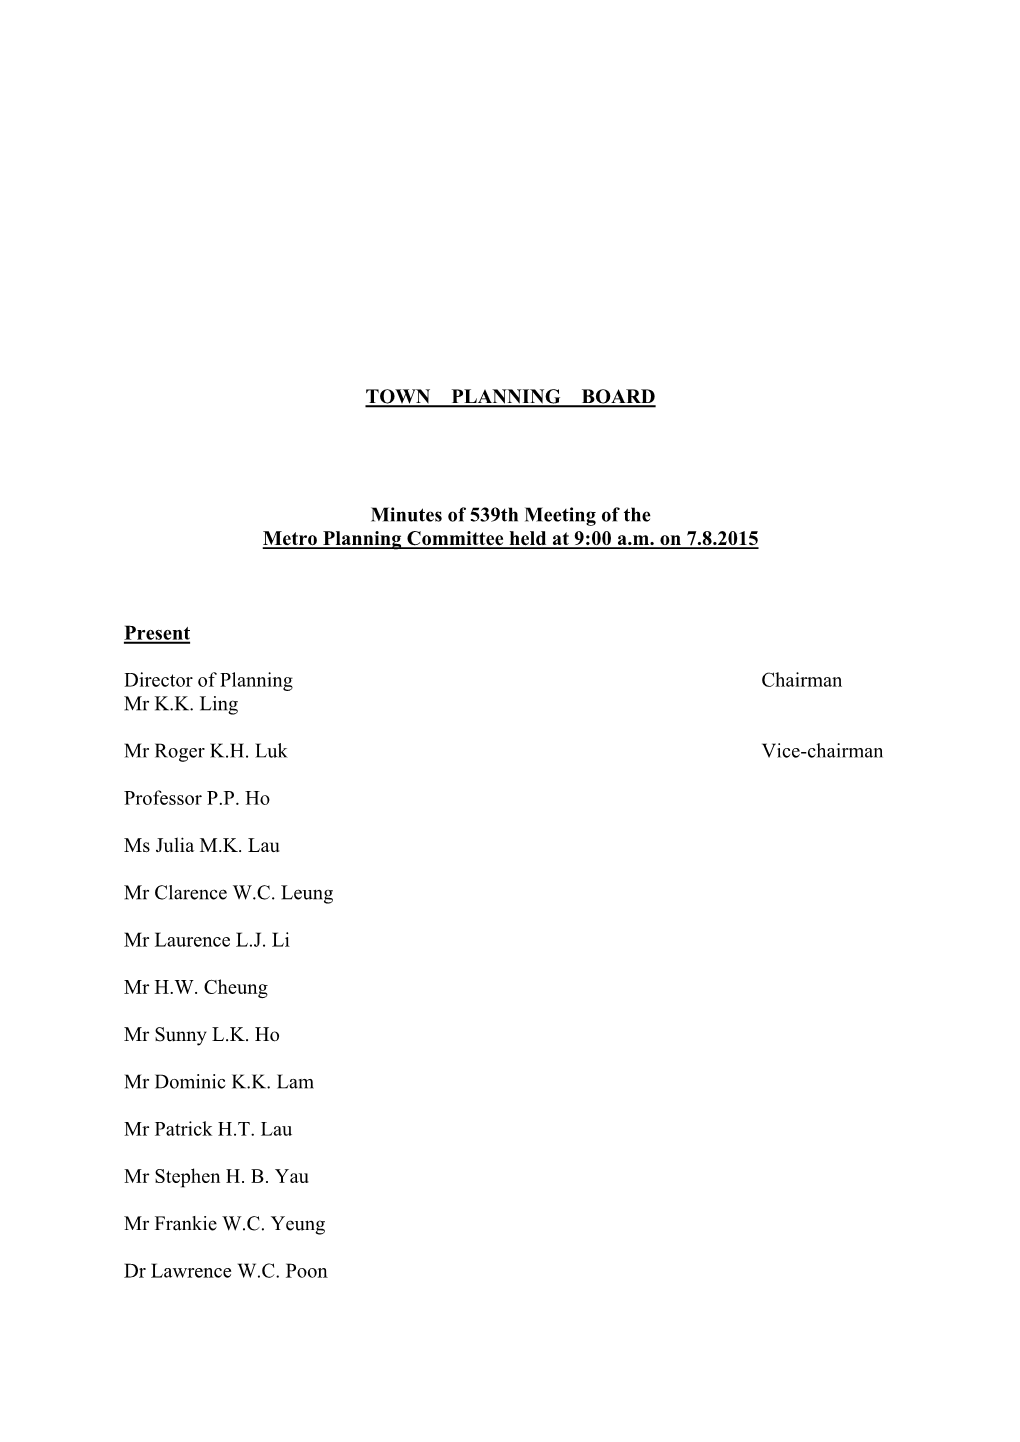 TOWN PLANNING BOARD Minutes of 539Th Meeting of the Metro